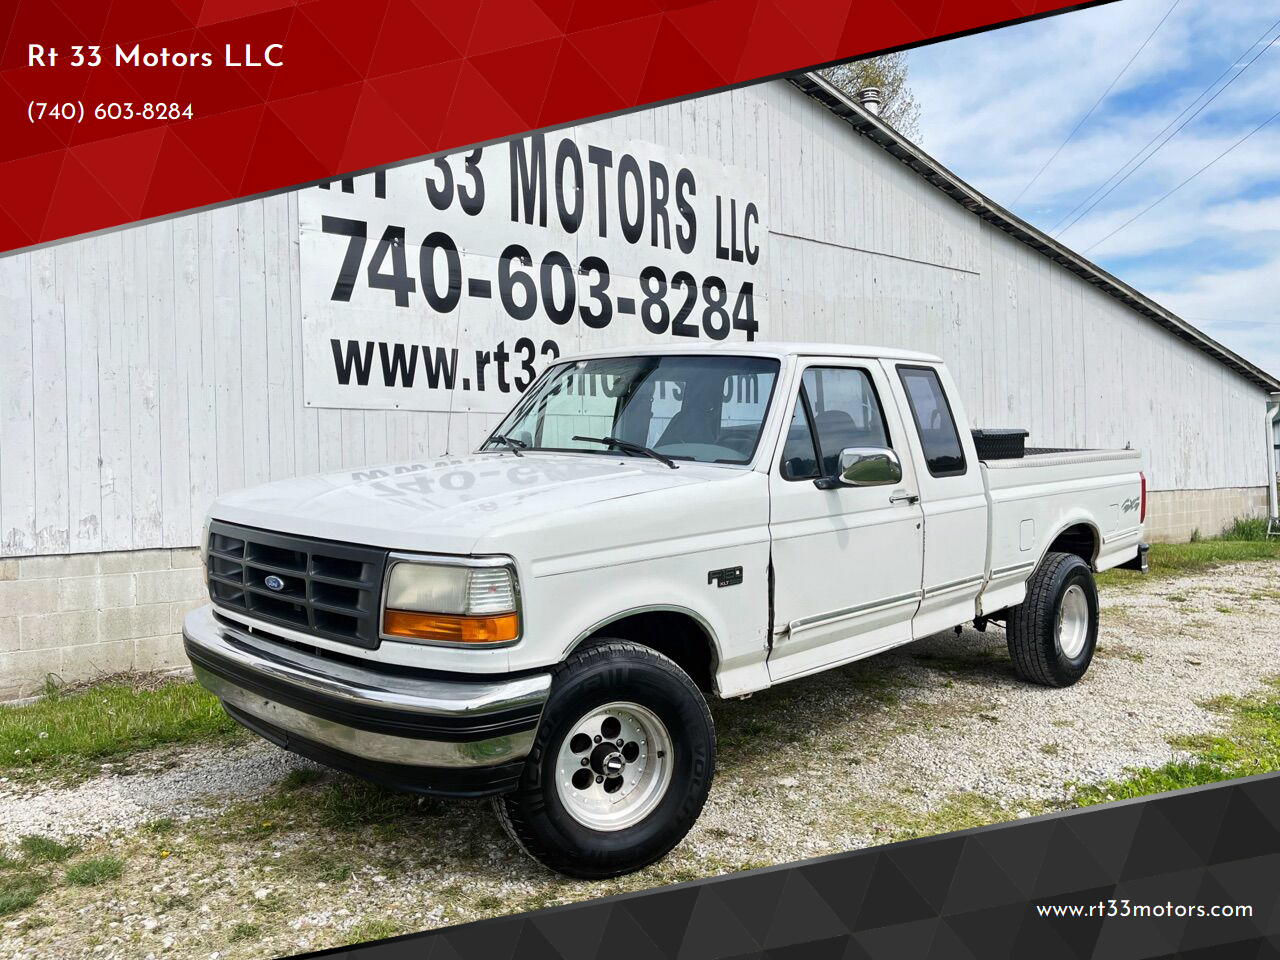 1995 Ford F-150 XLT 4WD Extended Cab LB